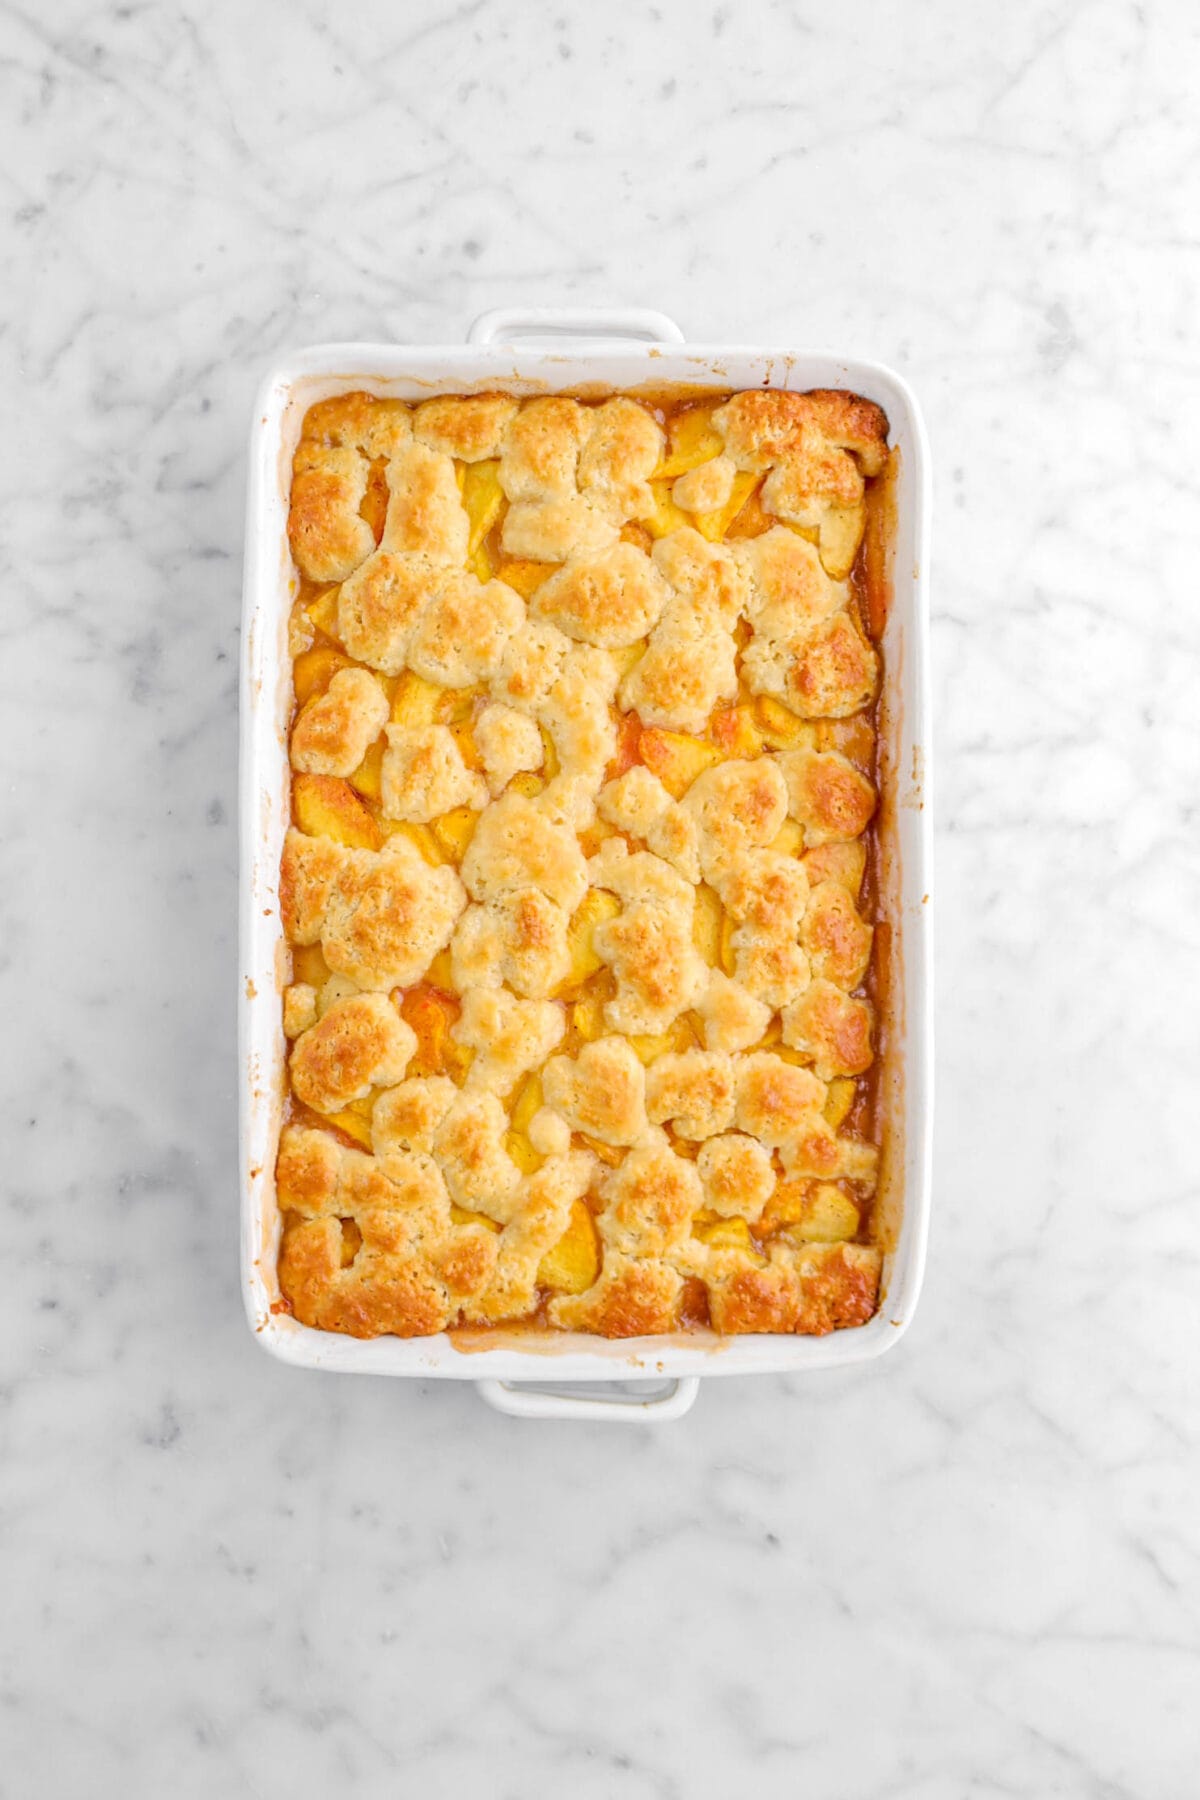 baked peach cobbler on marble surface